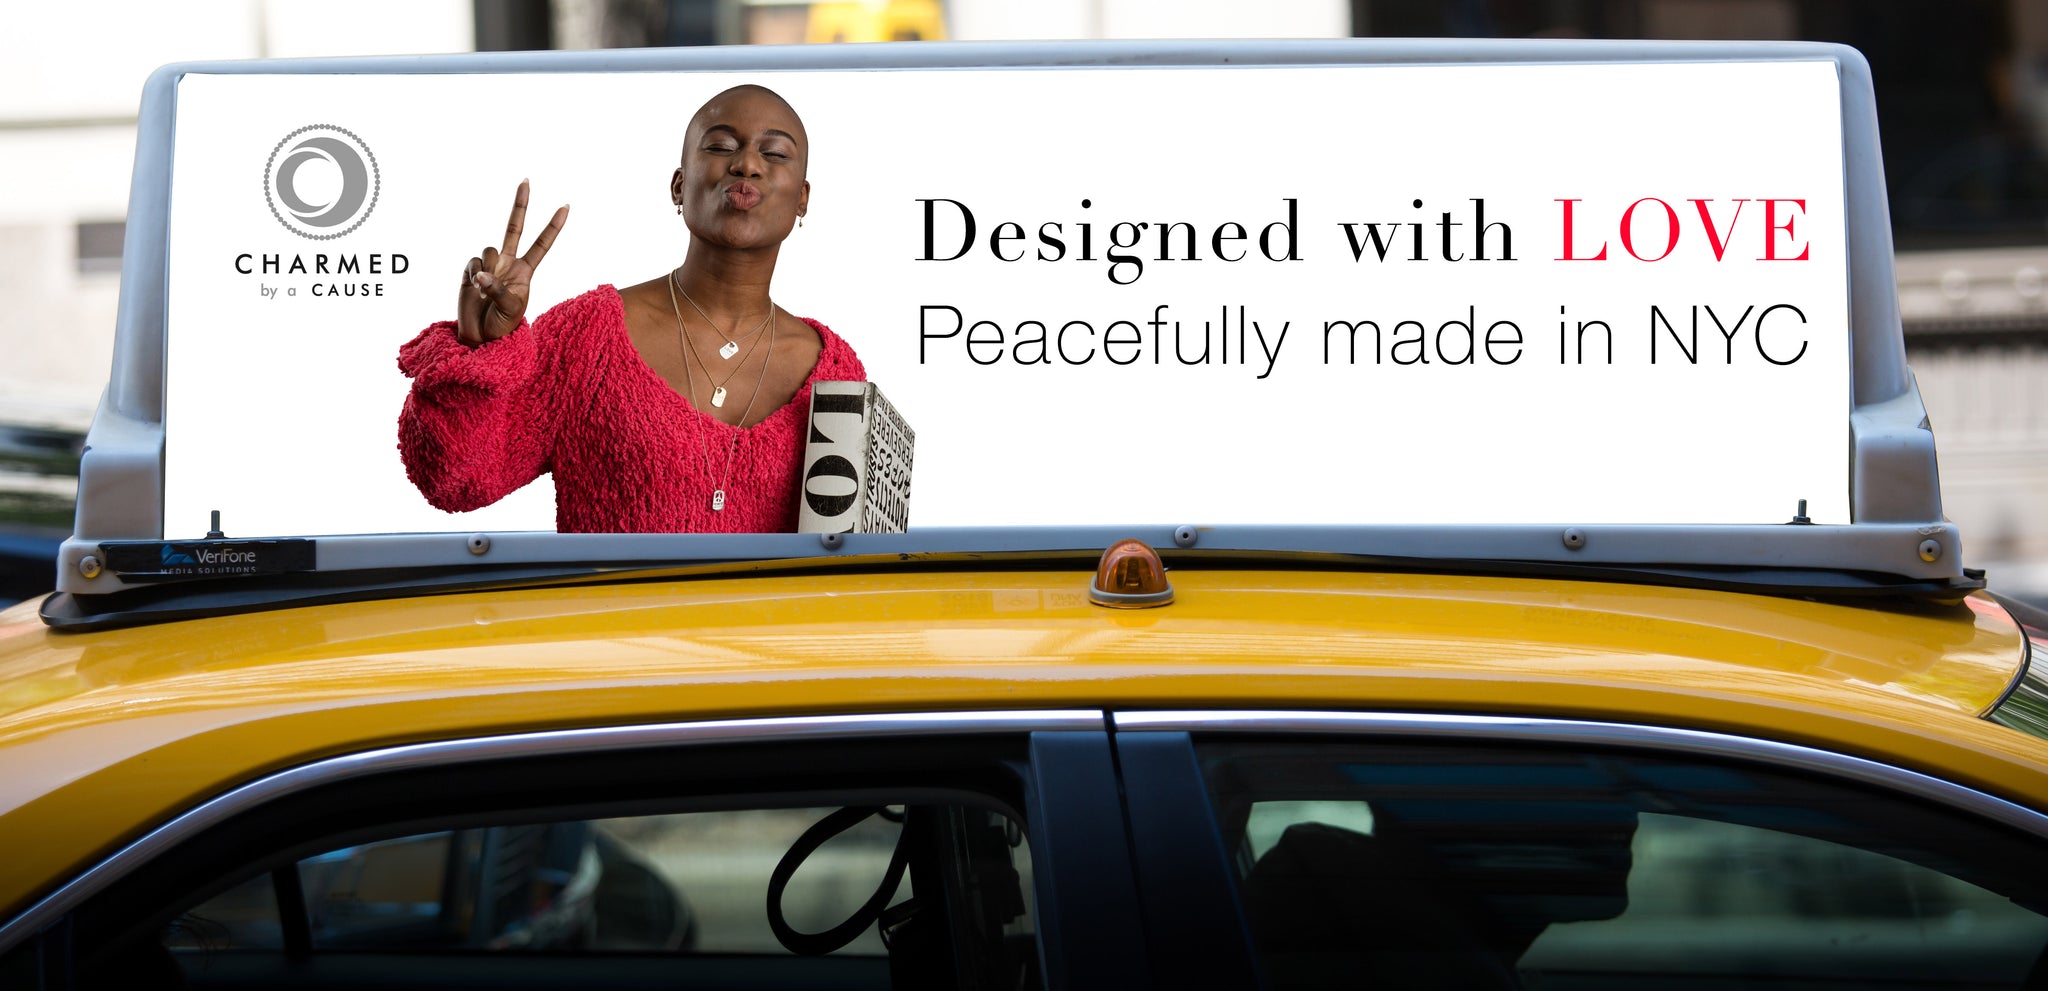 designed with love made peacefully in NYC